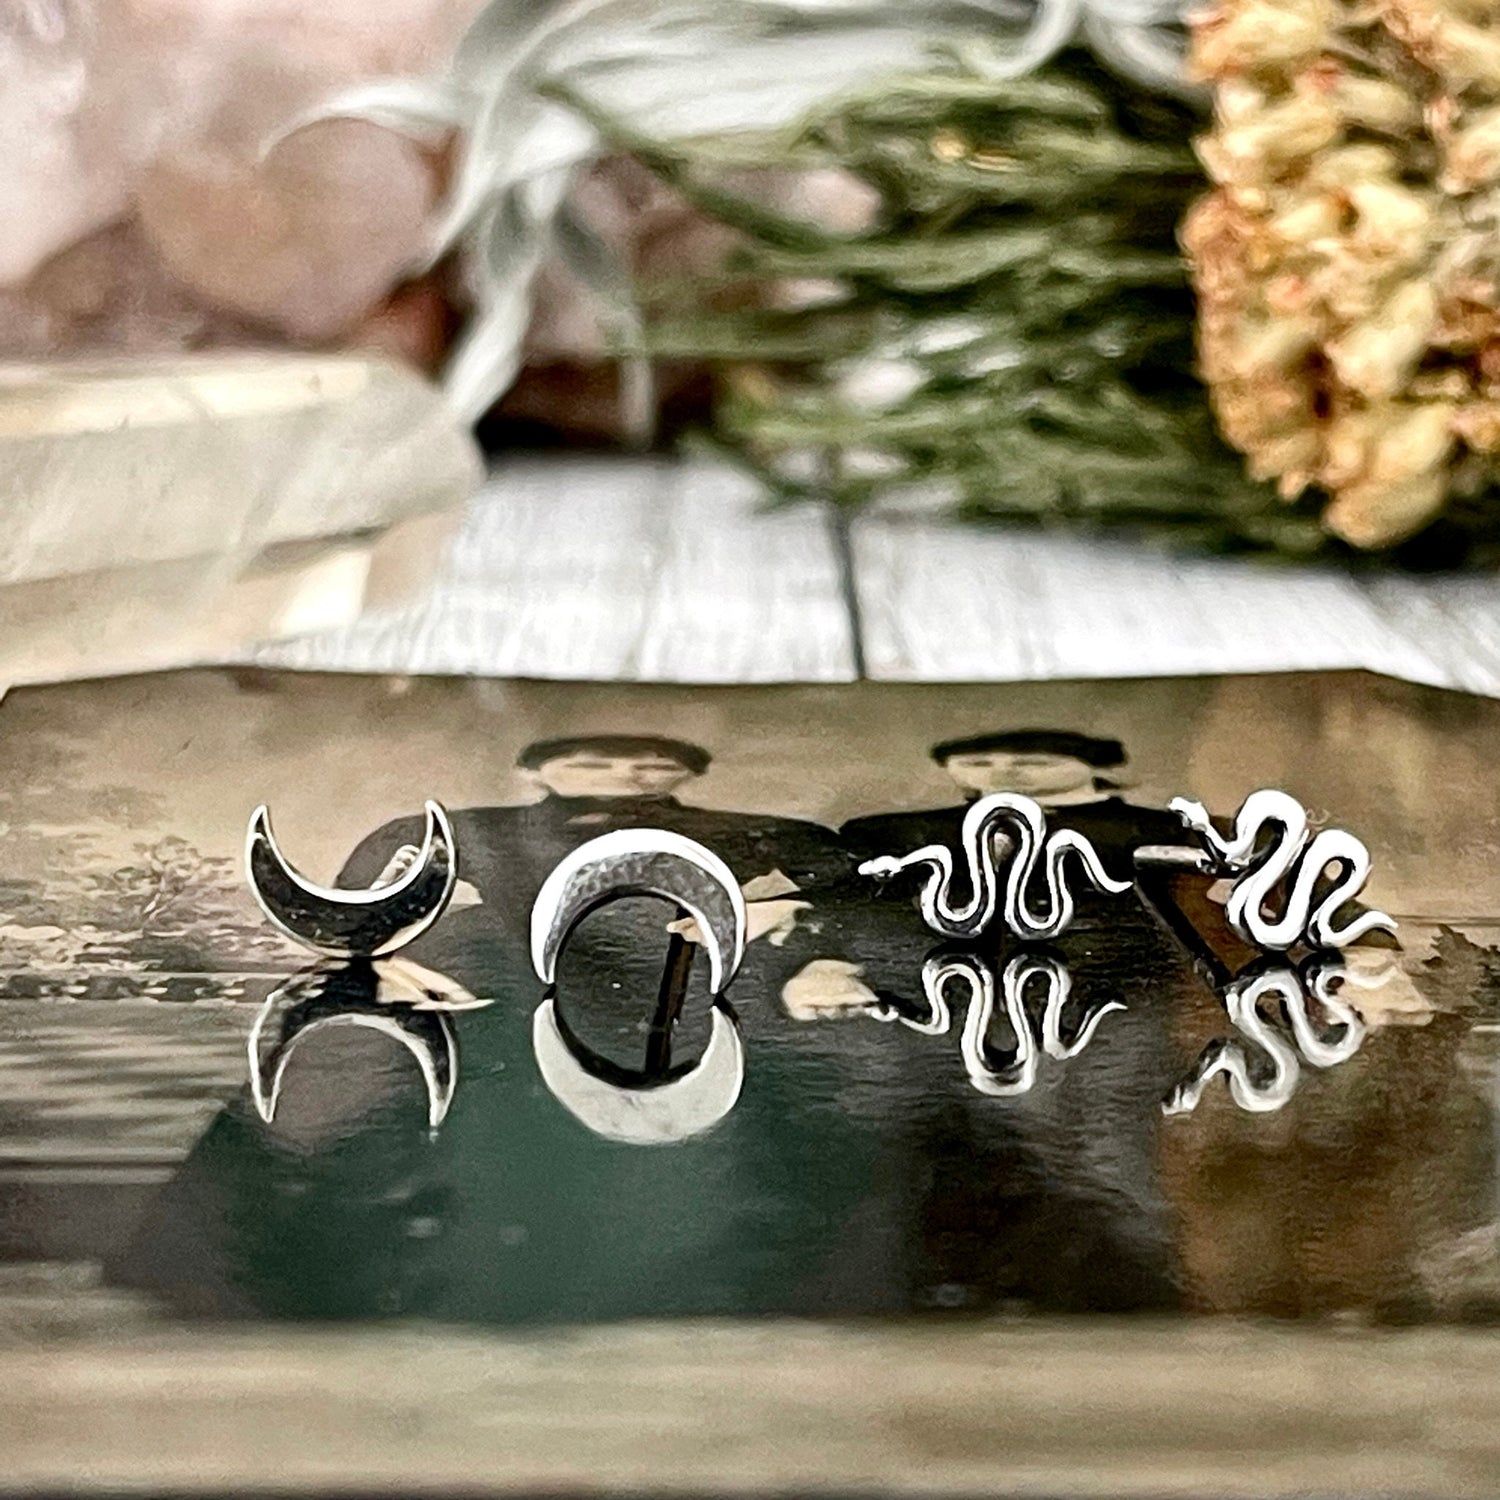 Tiny Crescent Moon and Snake Stud Earring Set / / Sterling Silver Stud Earrings / Witchy Jewelry Gothic Earrings Alternative Magic Punk Rock